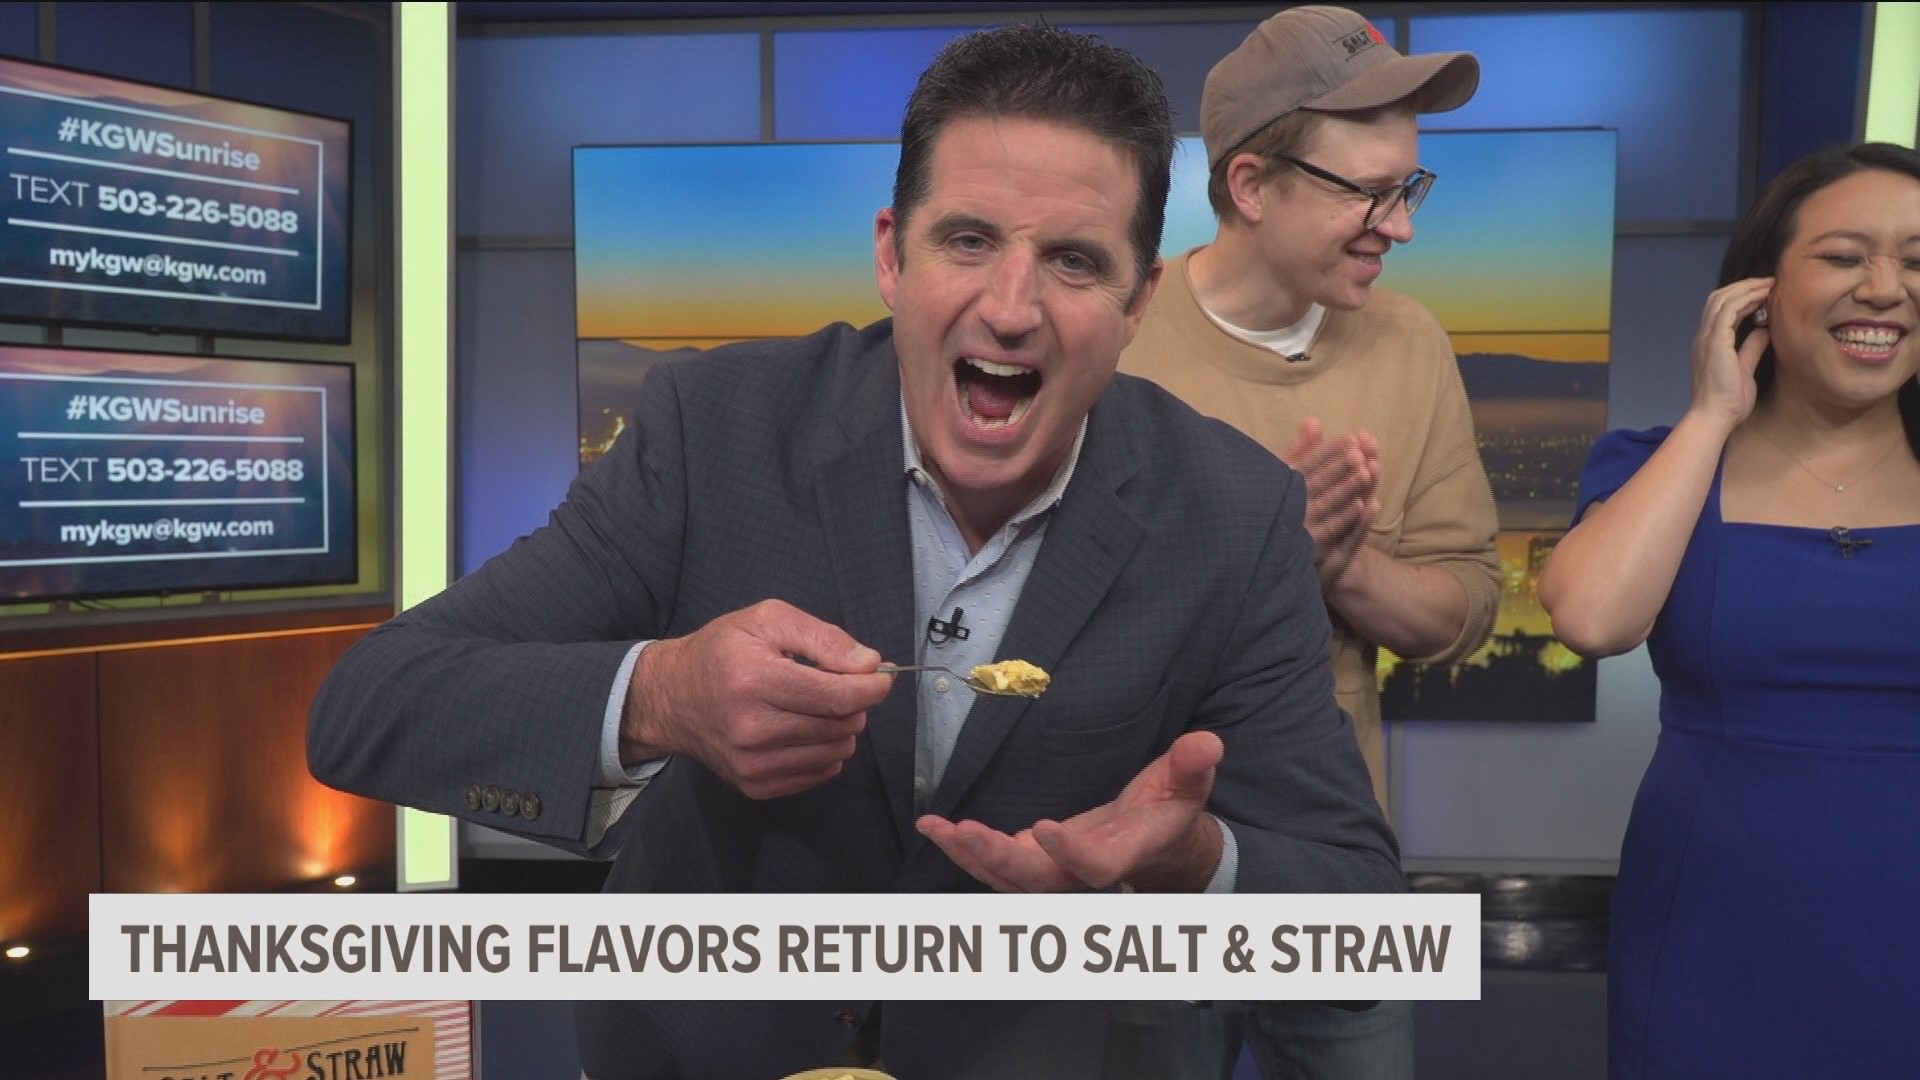 Tyler Malek, owner of Salt and Straw comes to the KGW studio to share their new Thanksgiving flavors. The flavors drop on Friday November 3rd.